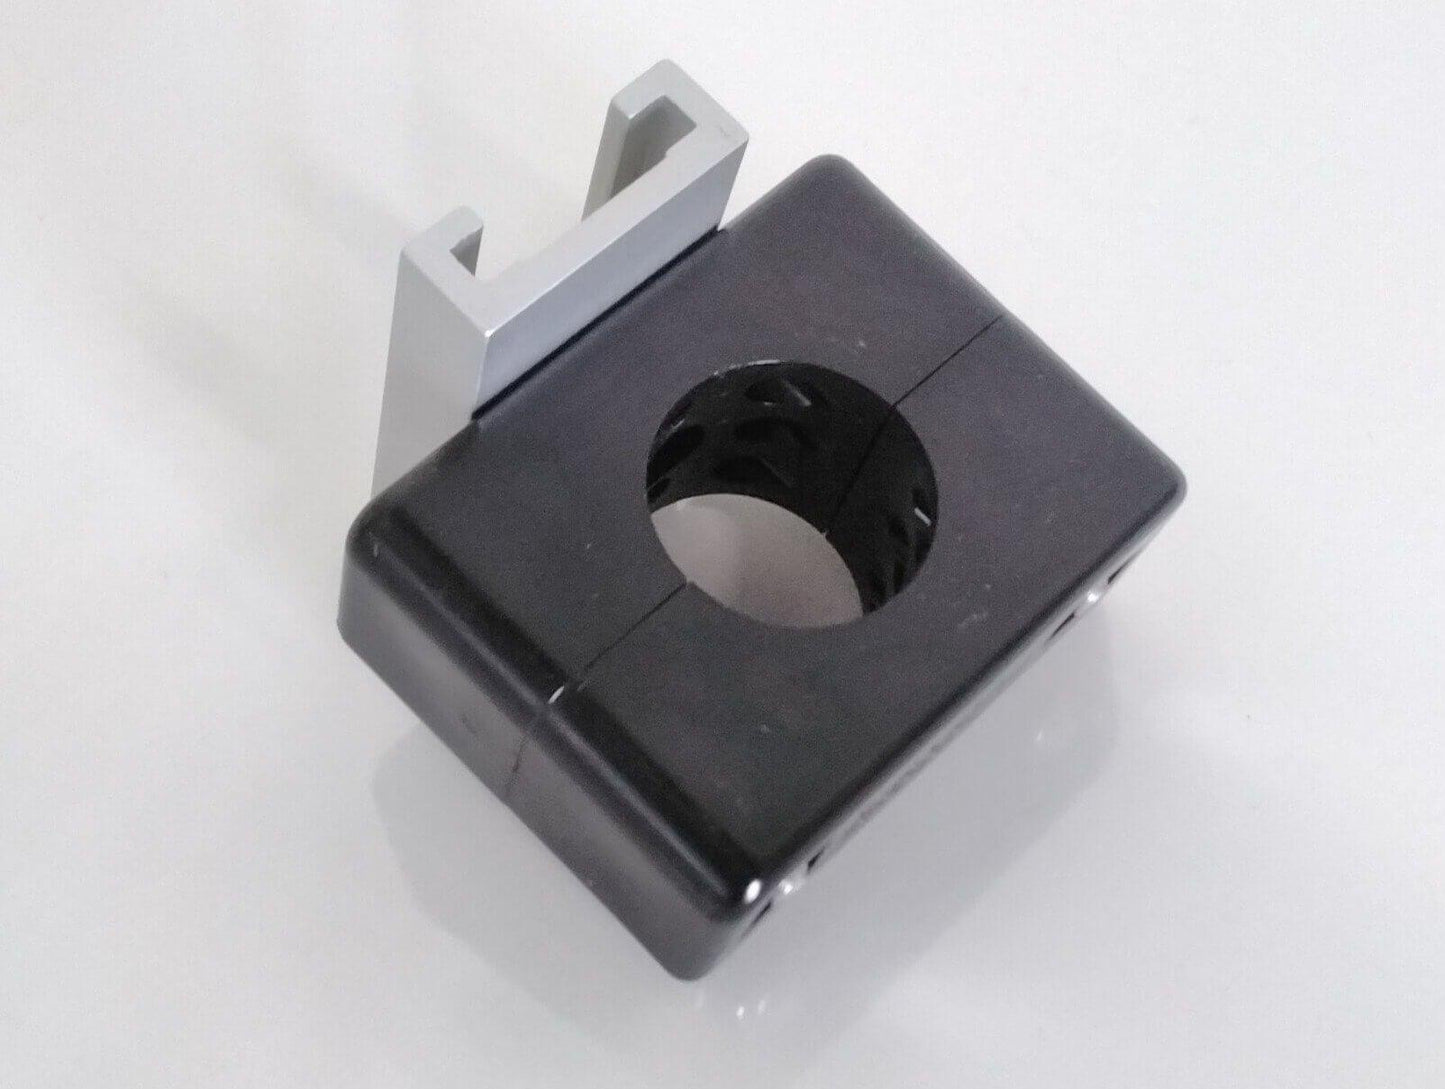 USED Pryor Products Humidifier Mounting Bracket Ring for Fisher and Paykel Humidifier with Free Shipping and Warranty - MBR Medicals